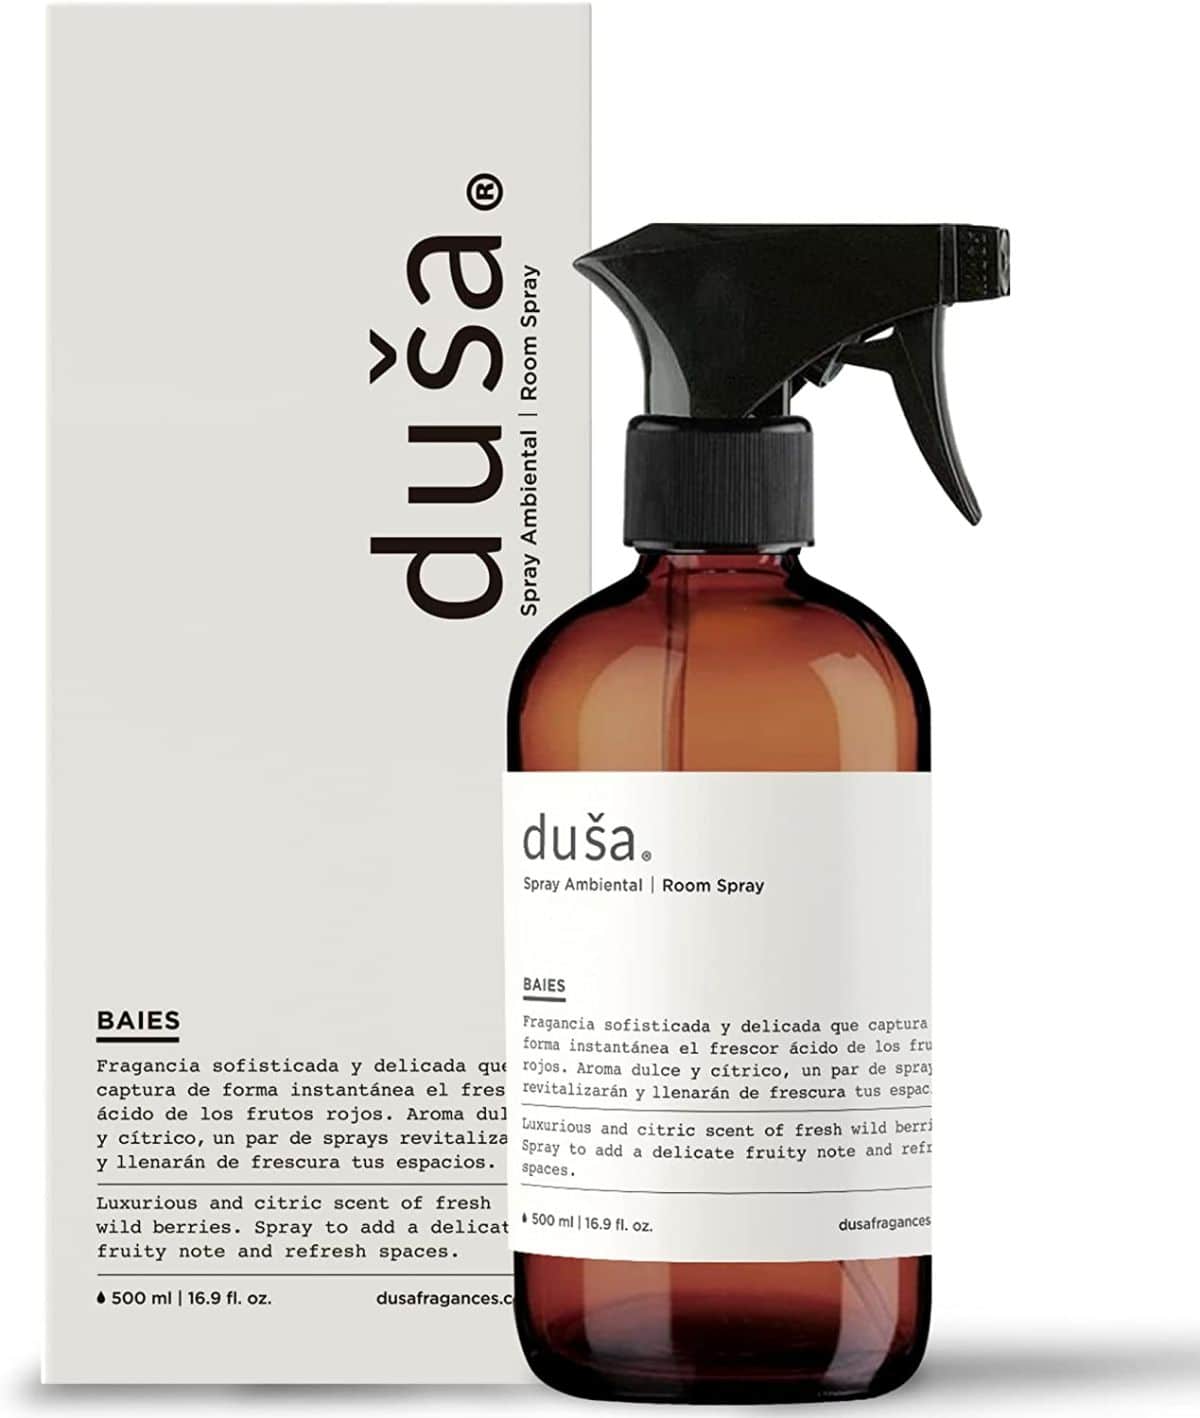 Air Freshener Spray Baies Scent by Dusa